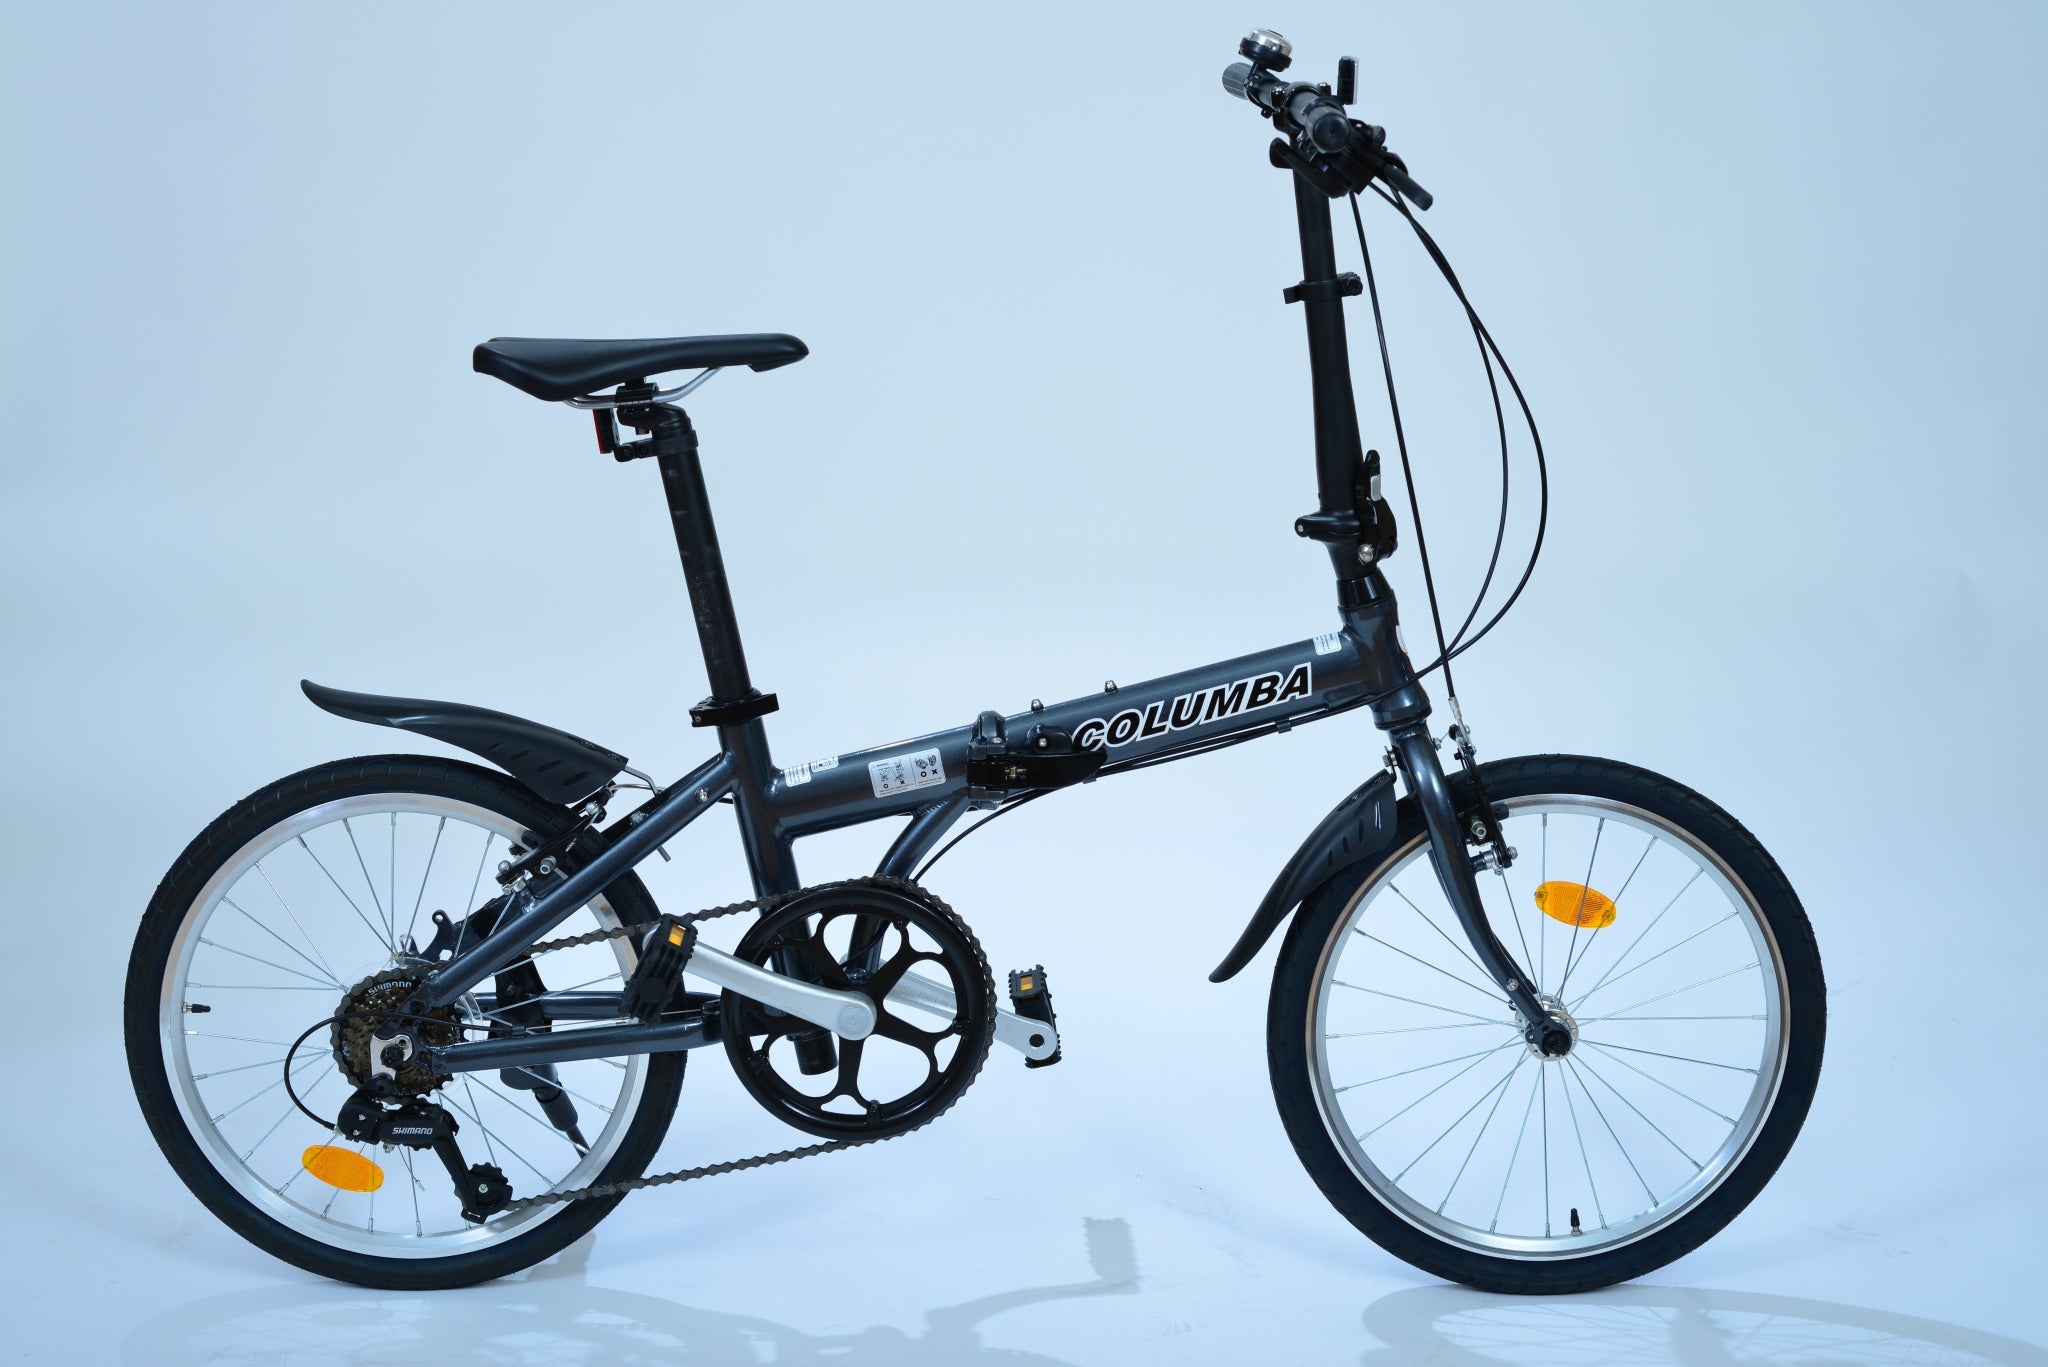 Full view of a dark gray folding bicycle.